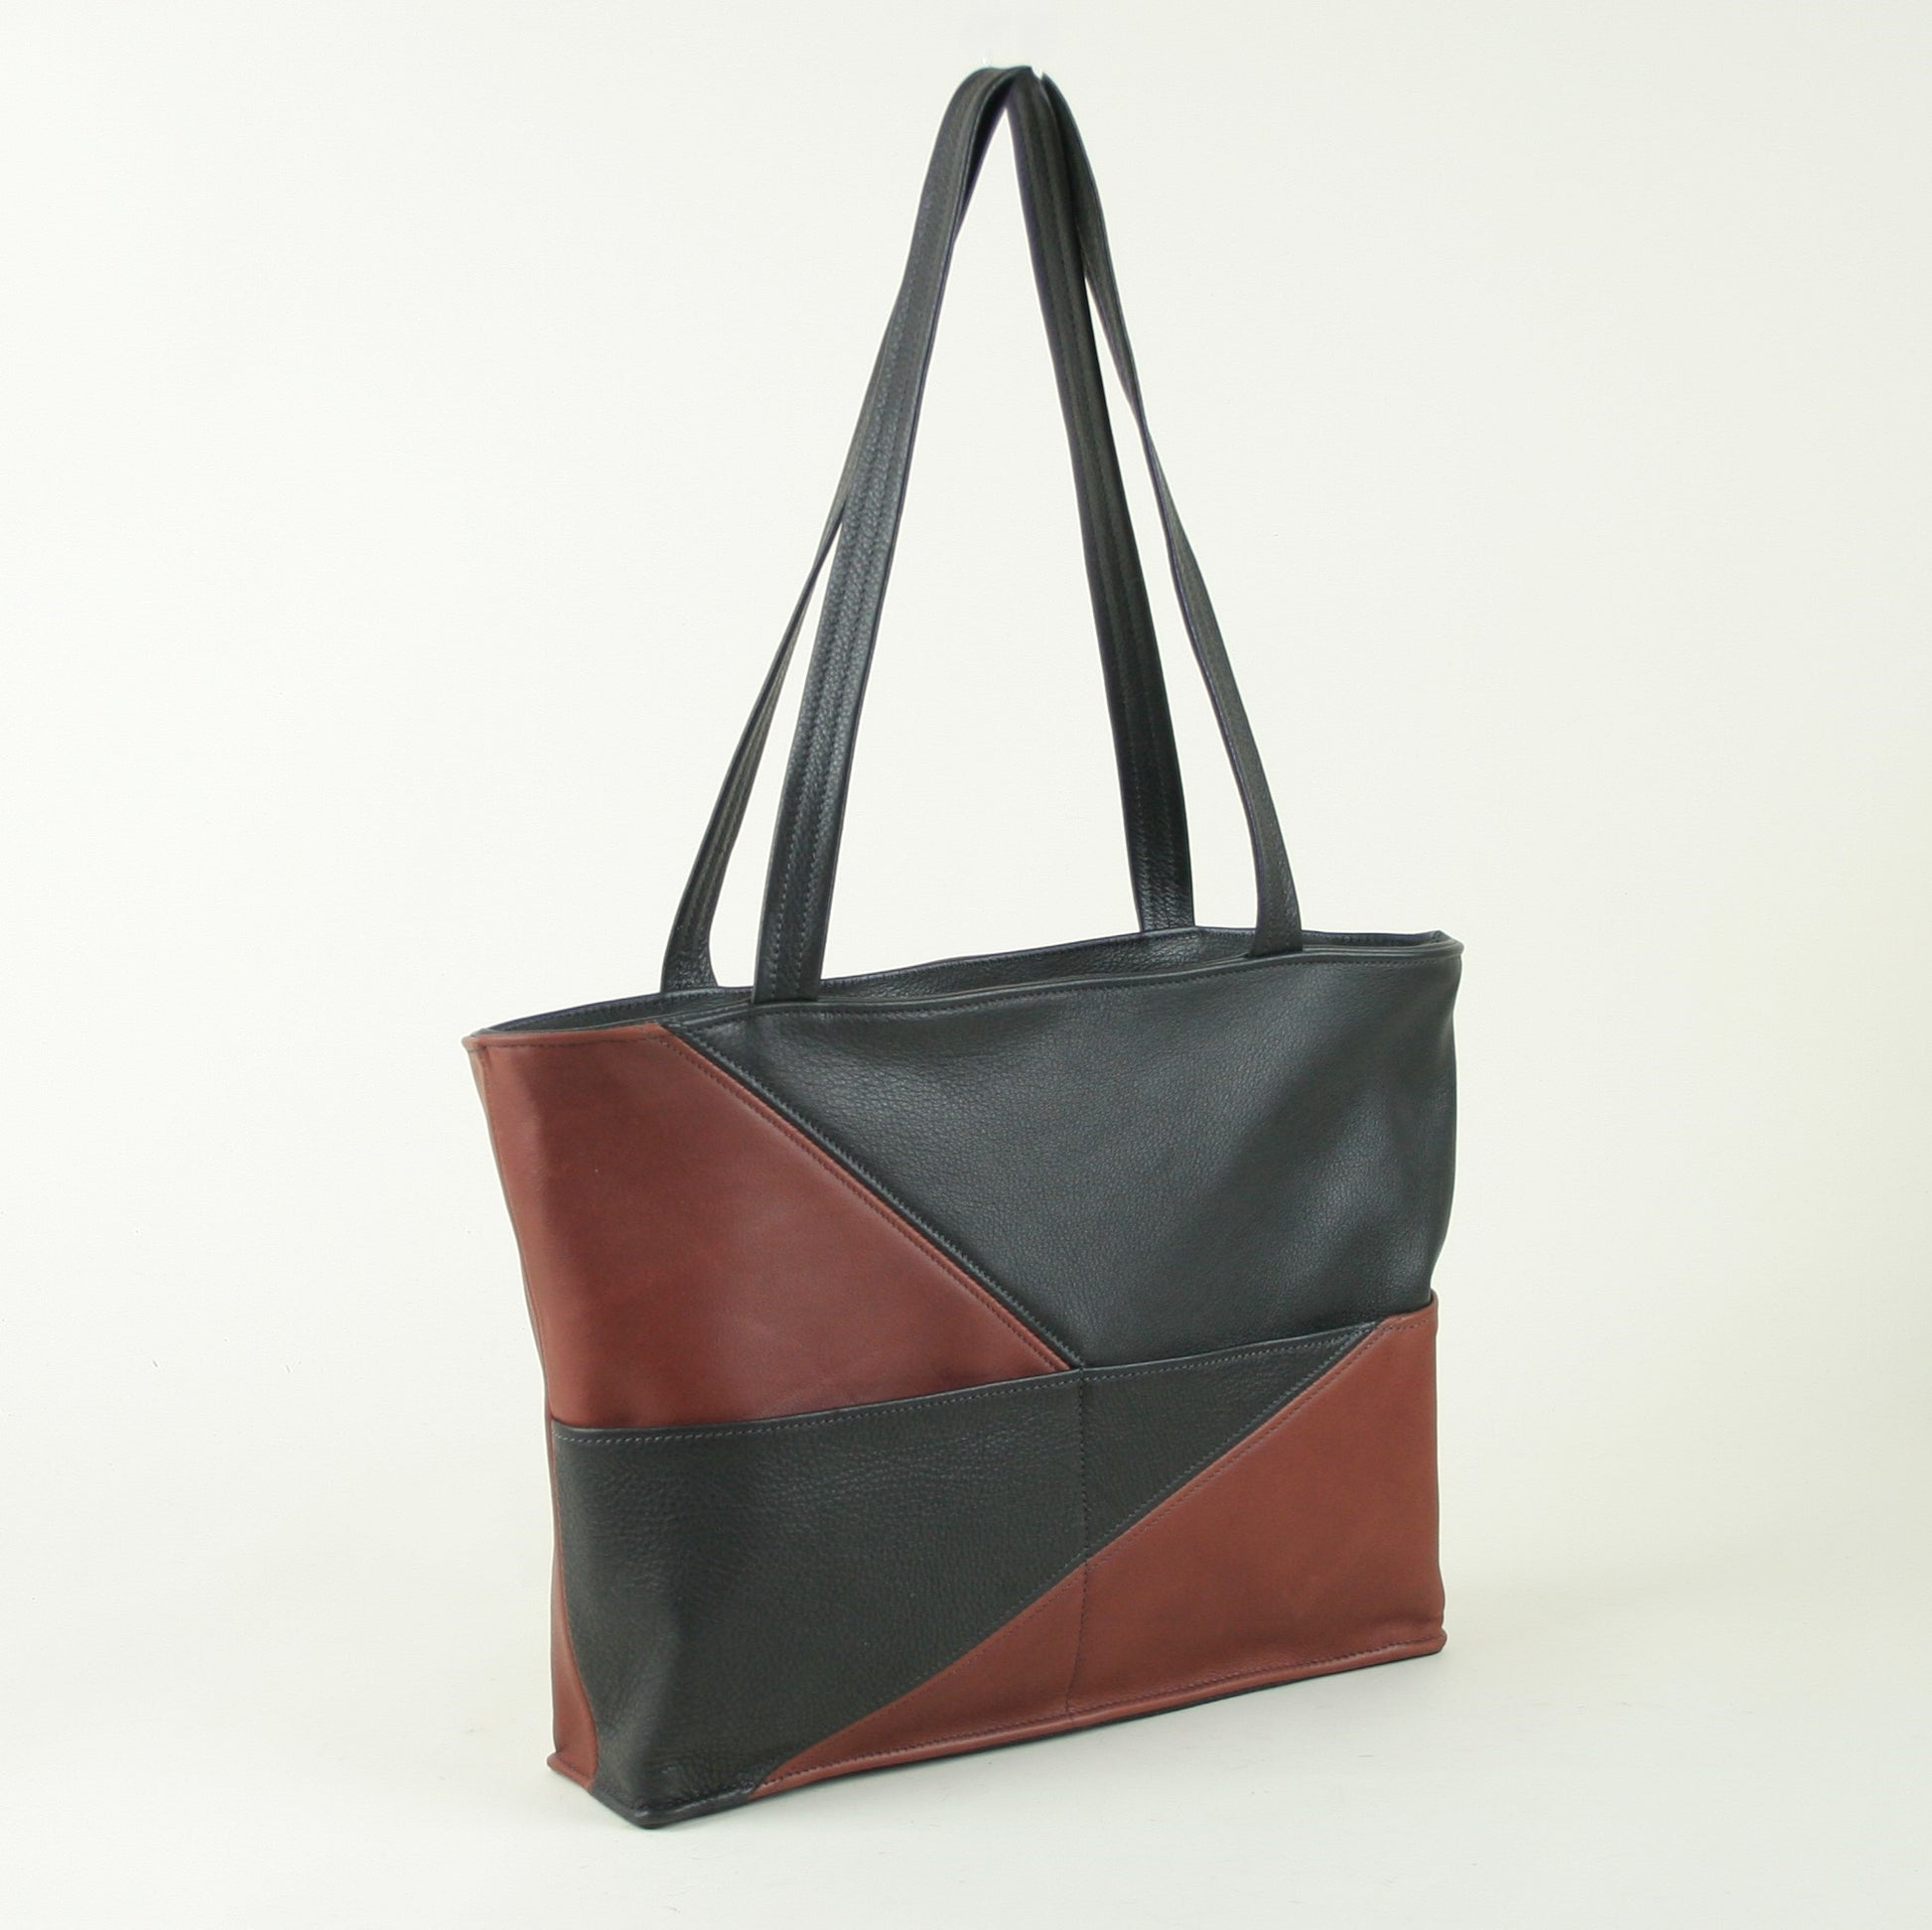 soft leather tote bag handmade in the USA.